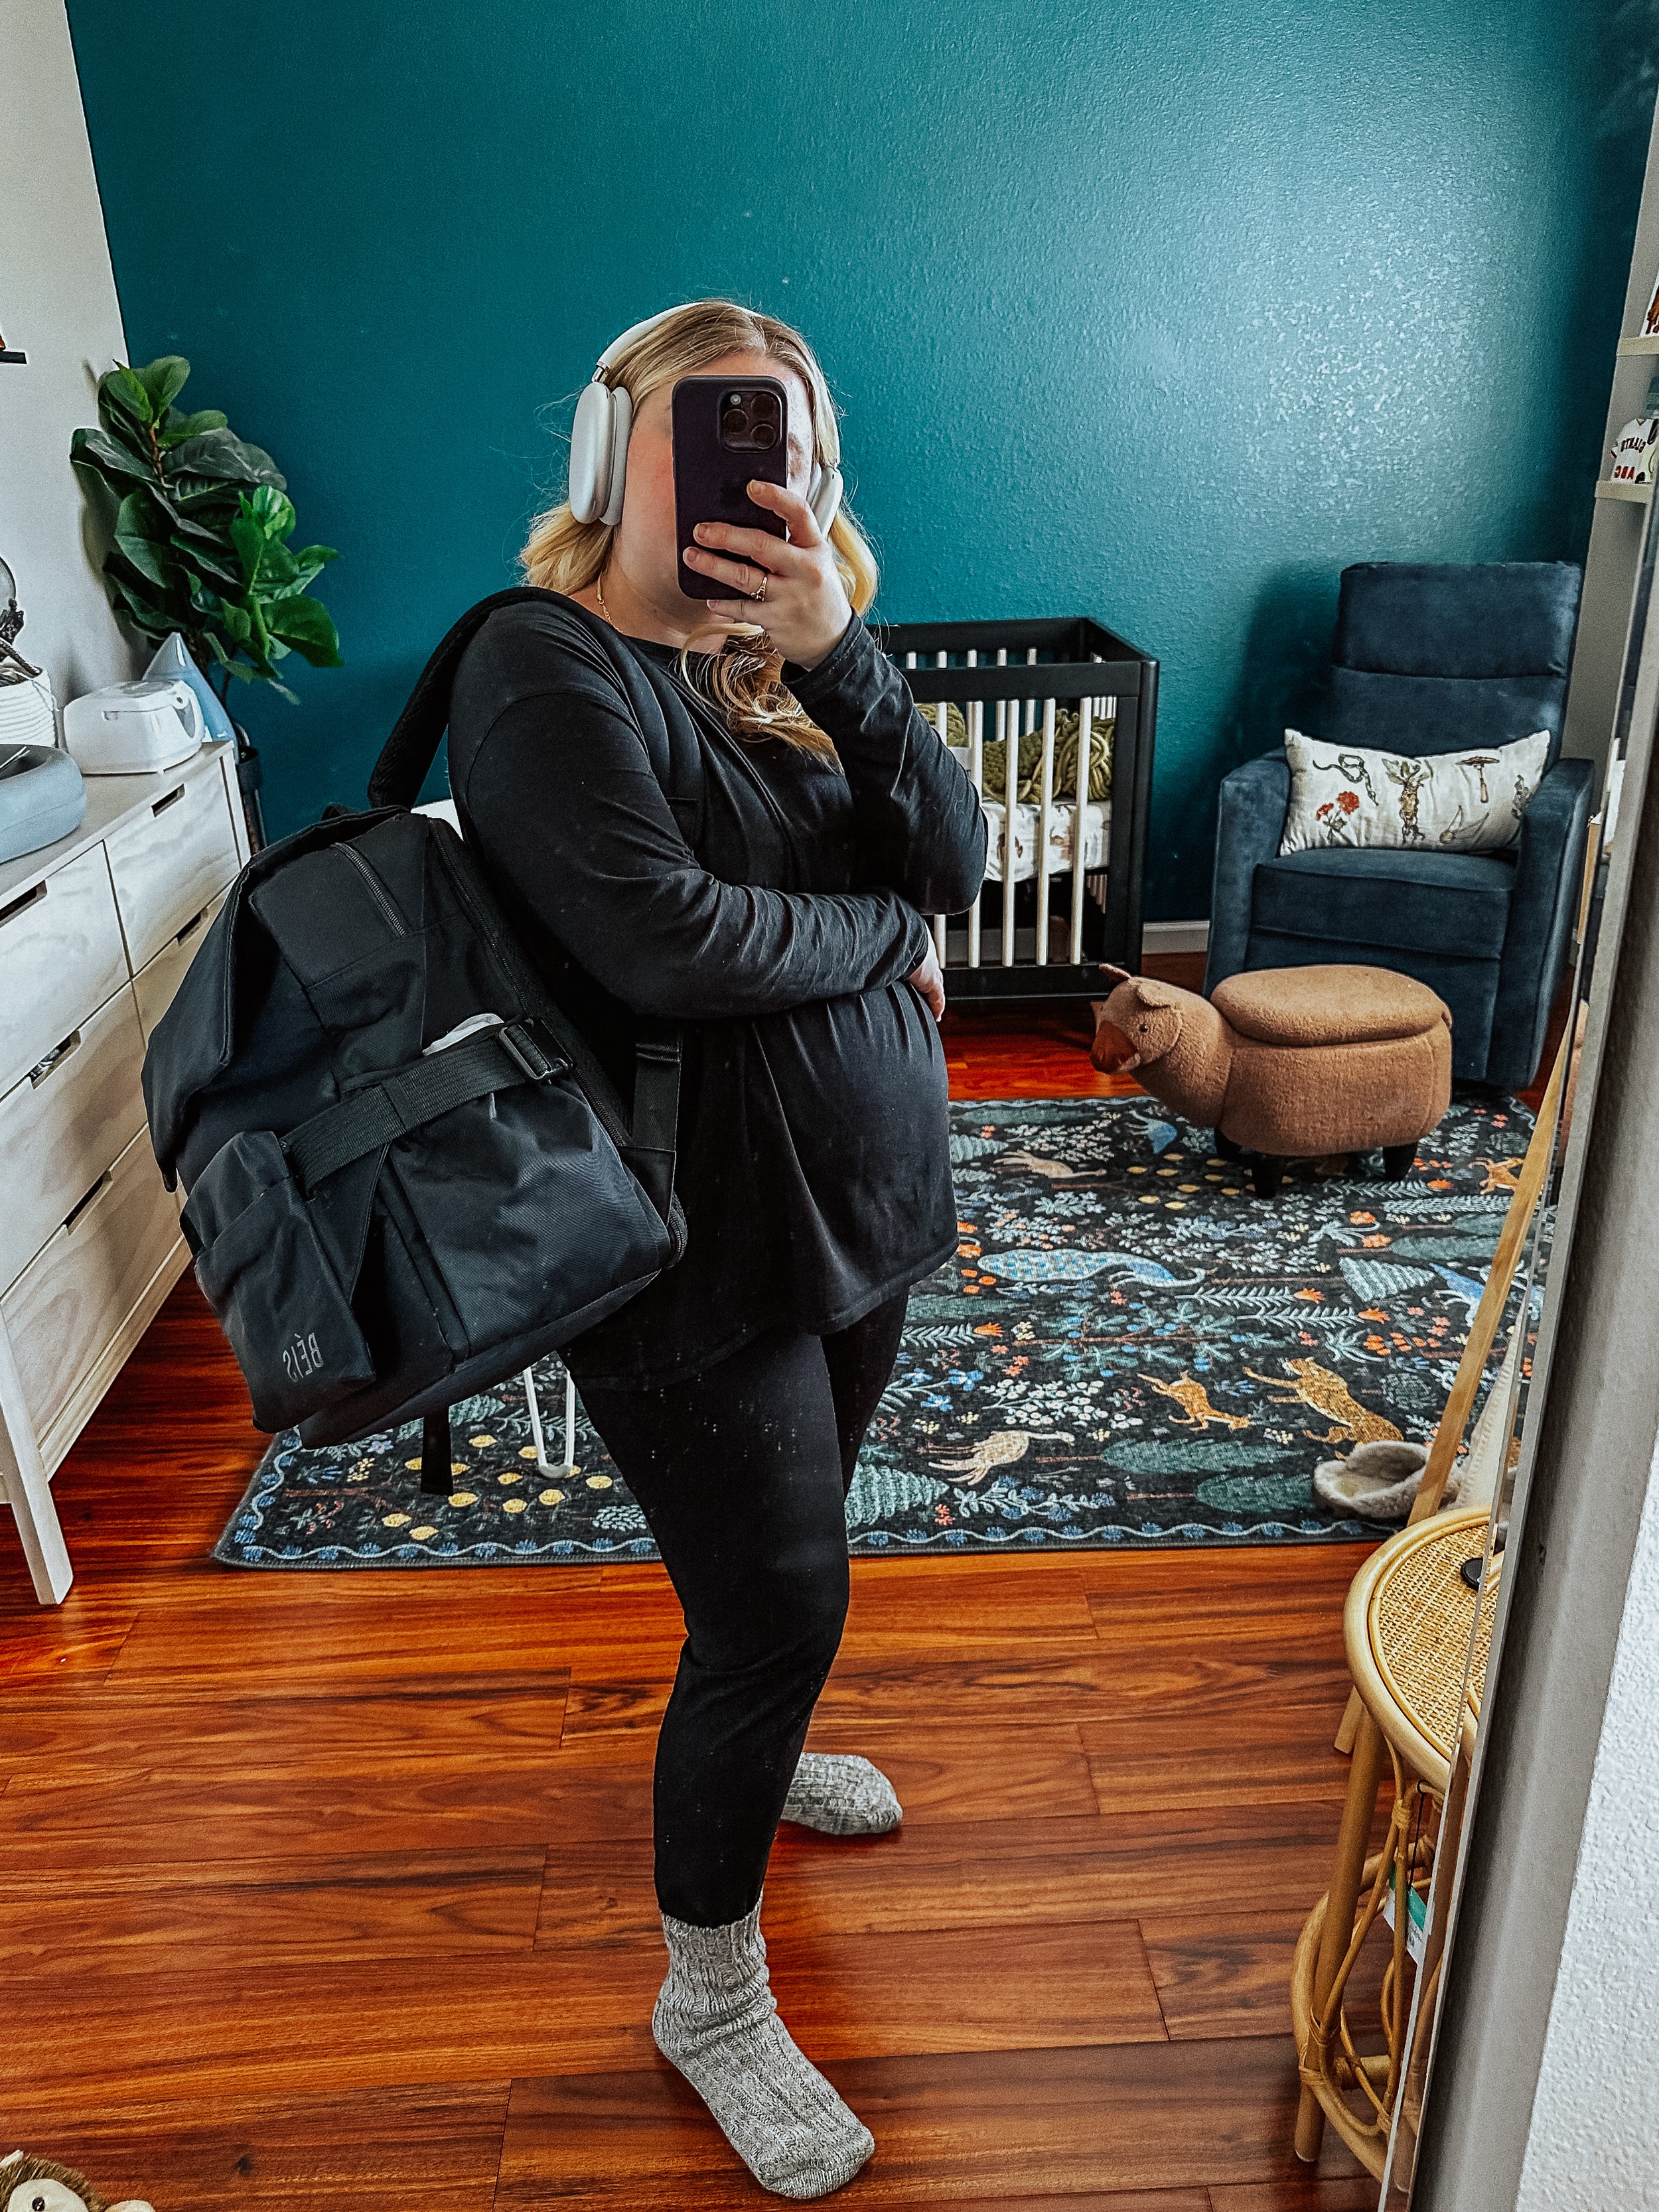 One of the first items I registered for was our Beis Diaper Bag. Or more specifically, our Beis Ultimate Diaper Backpack. 